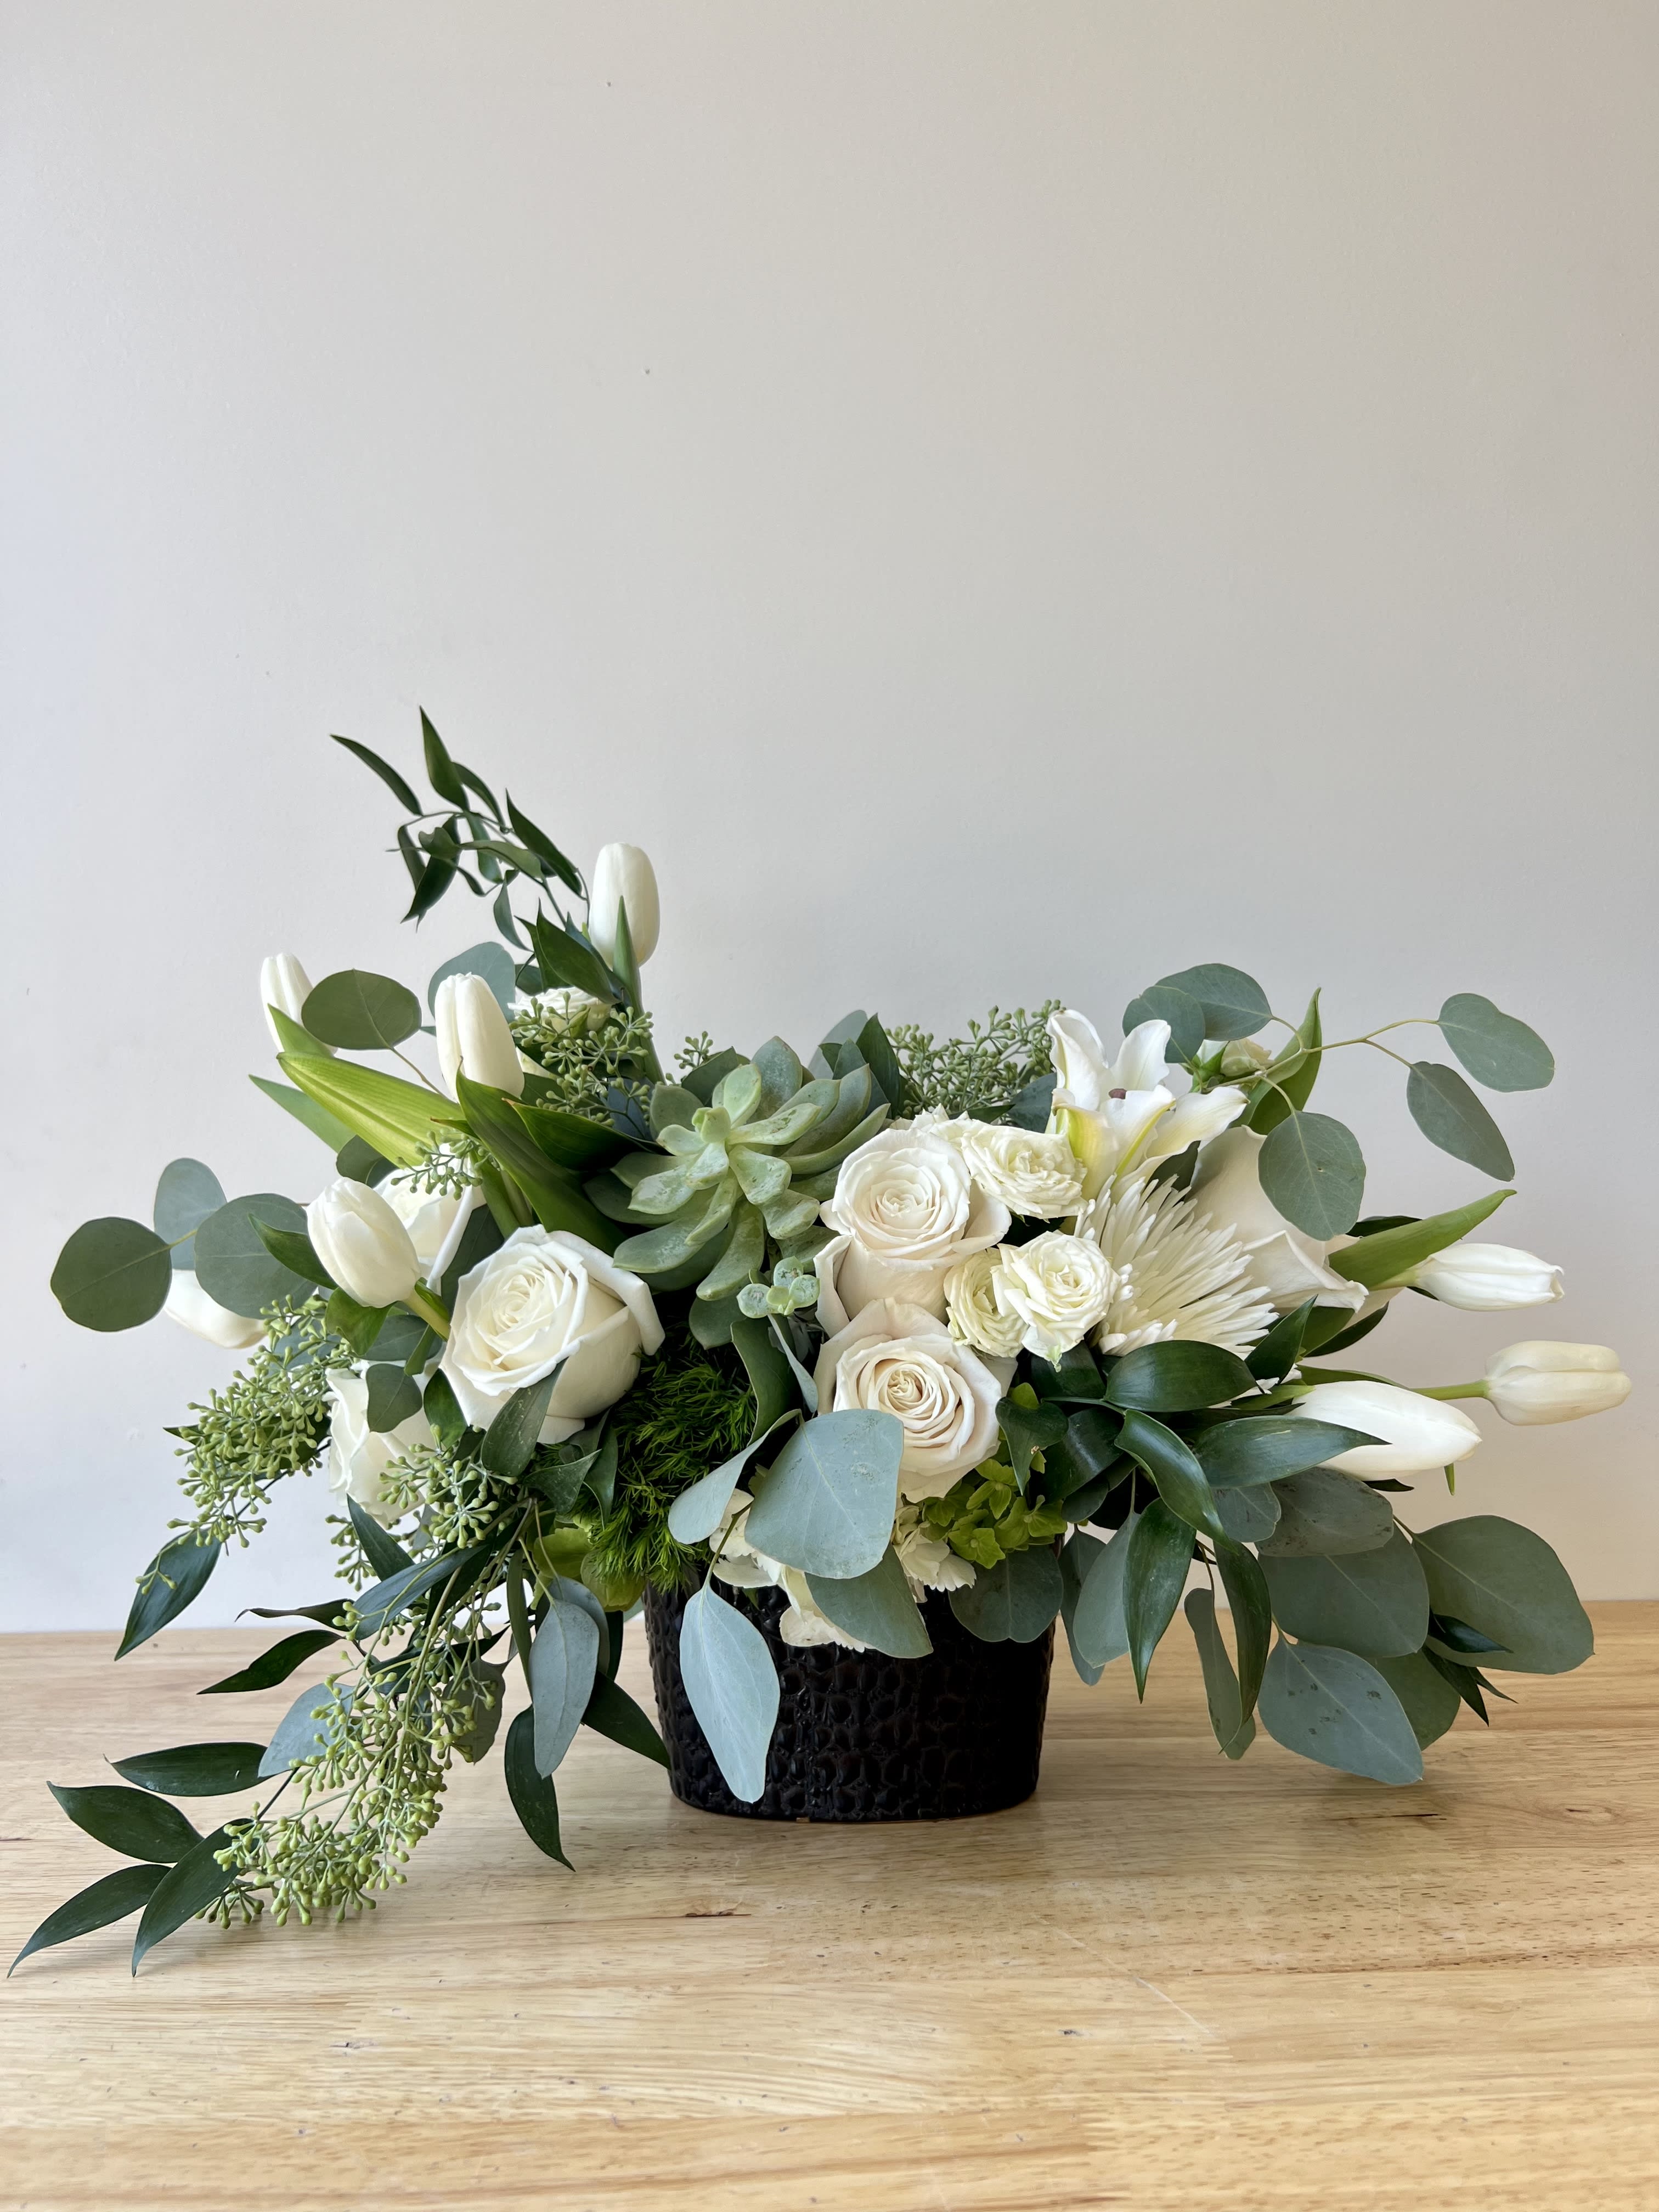 Snow White - Beautiful one-sided arrangement with a mixture of roses, orchids, greenery, and more.